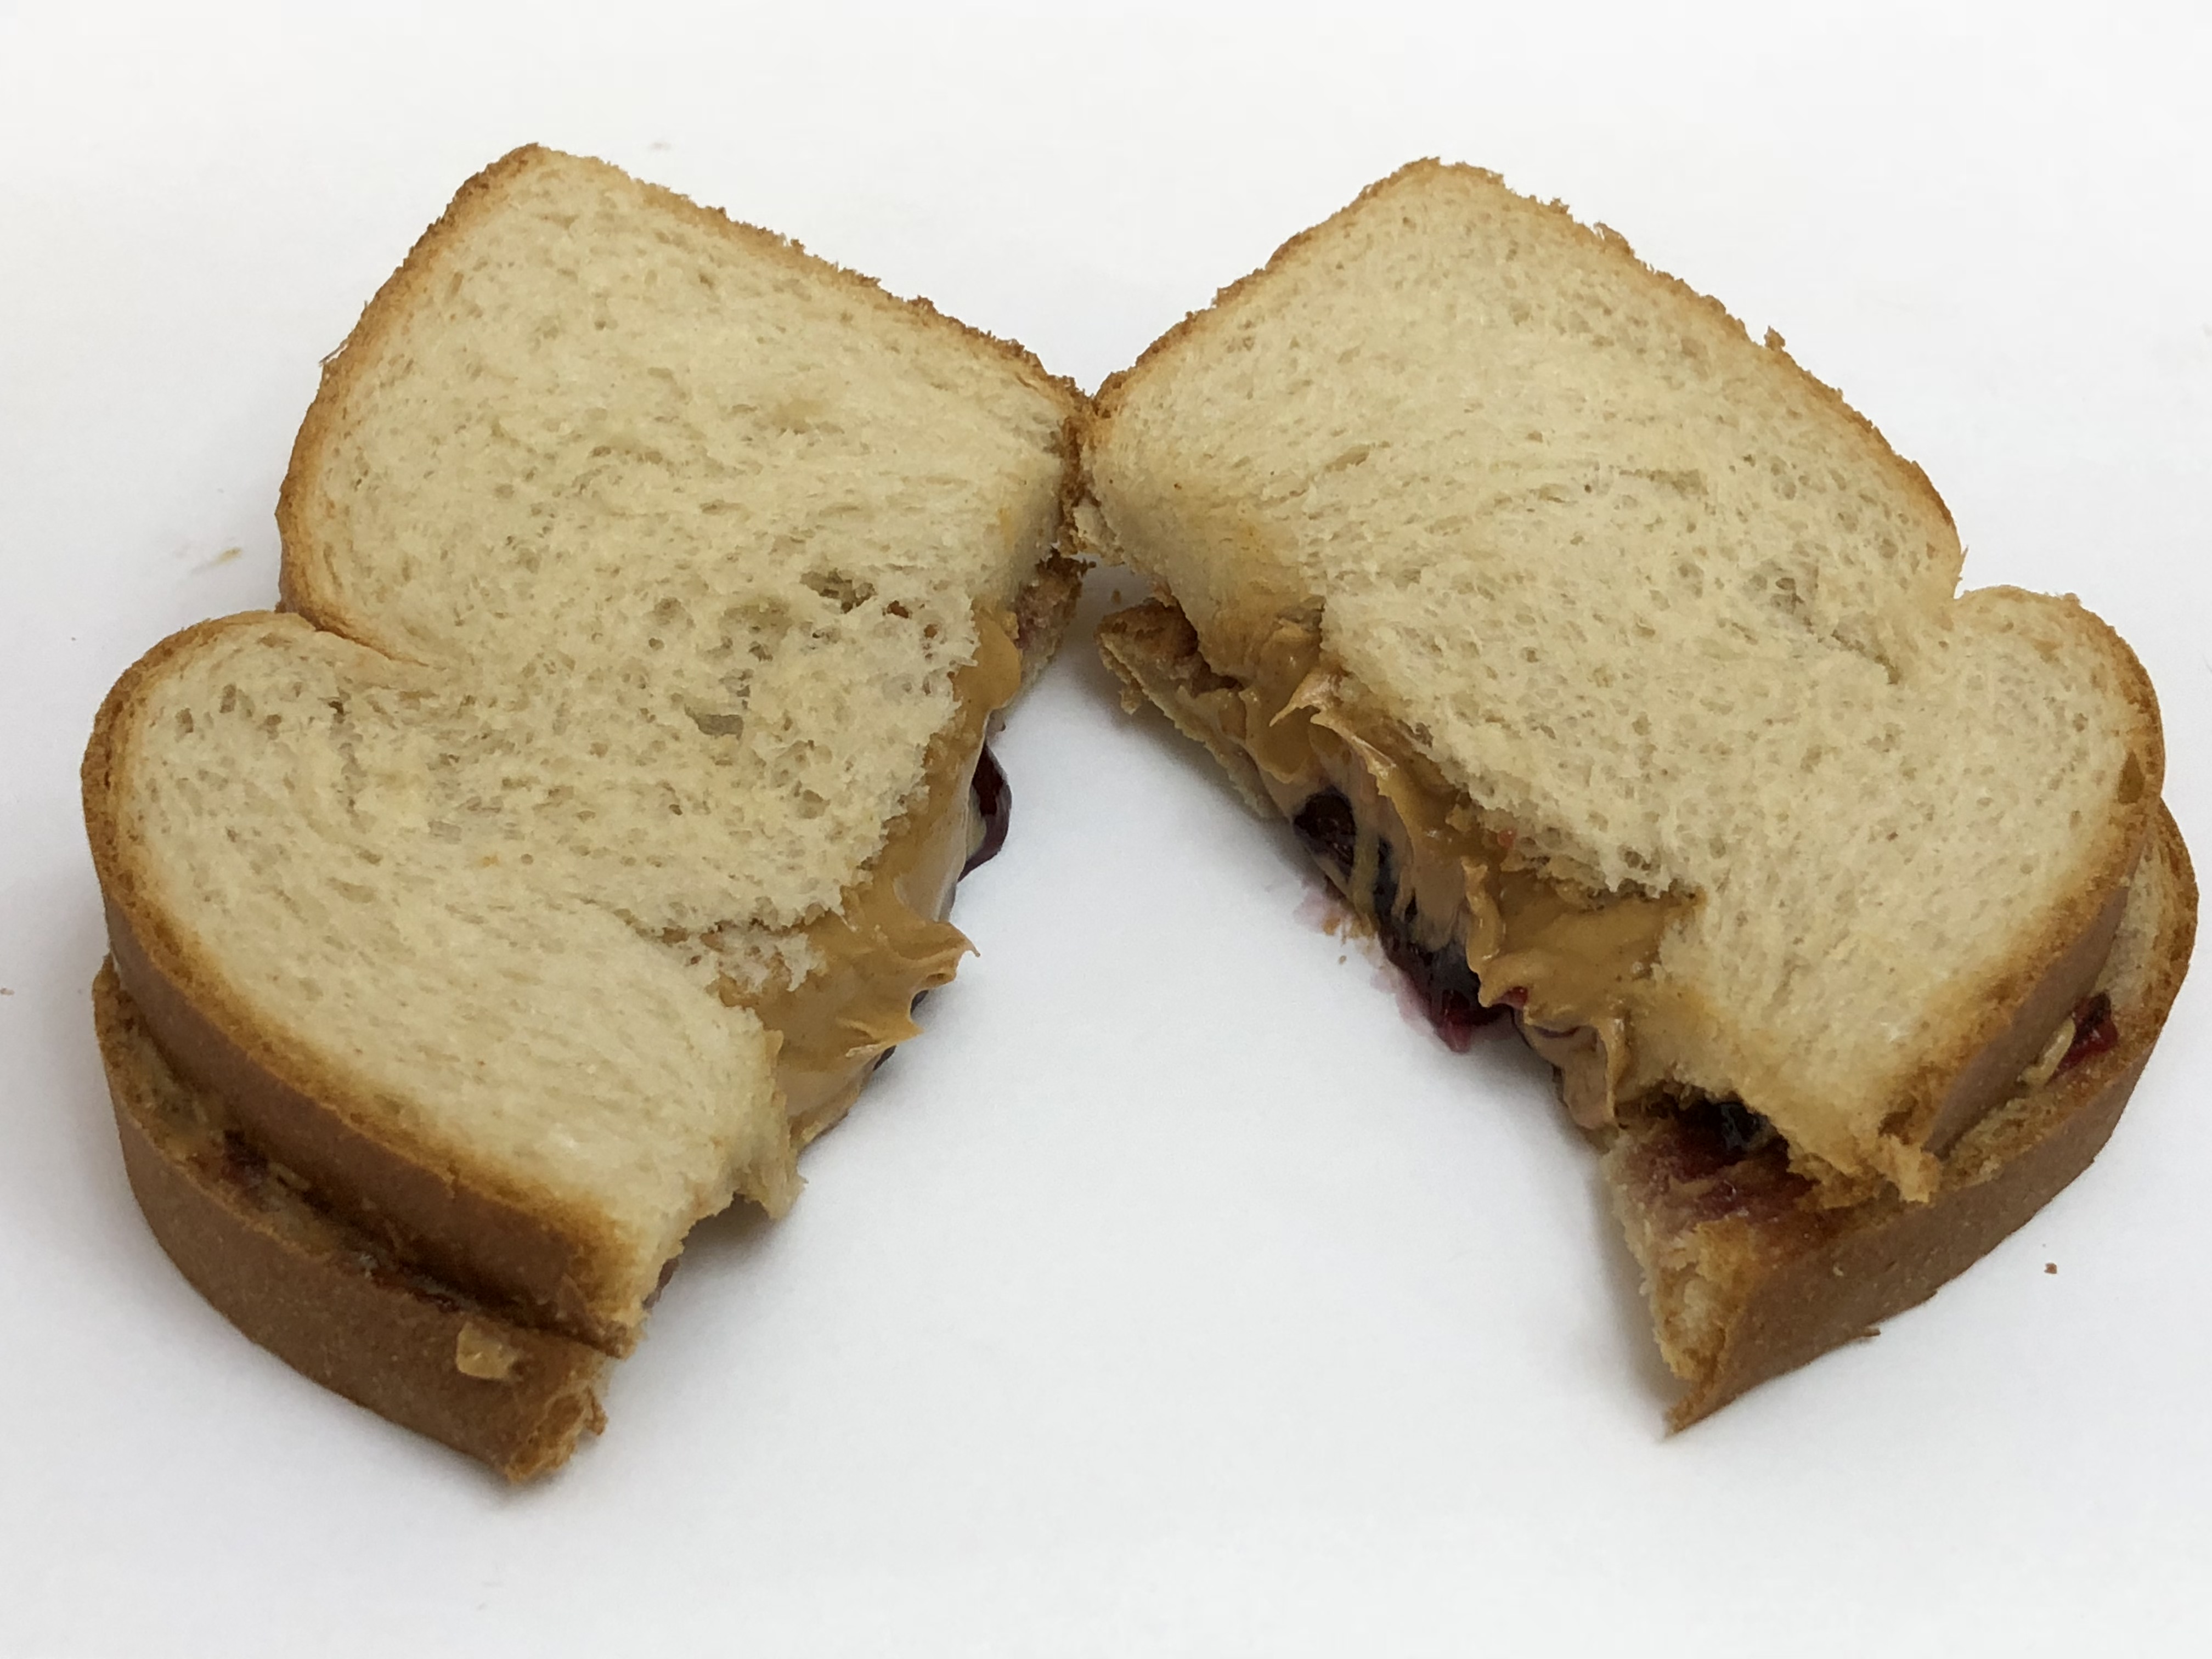 File 05 05 00 03 49 A Peanut Butter And Jelly Sandwich Cut In Two